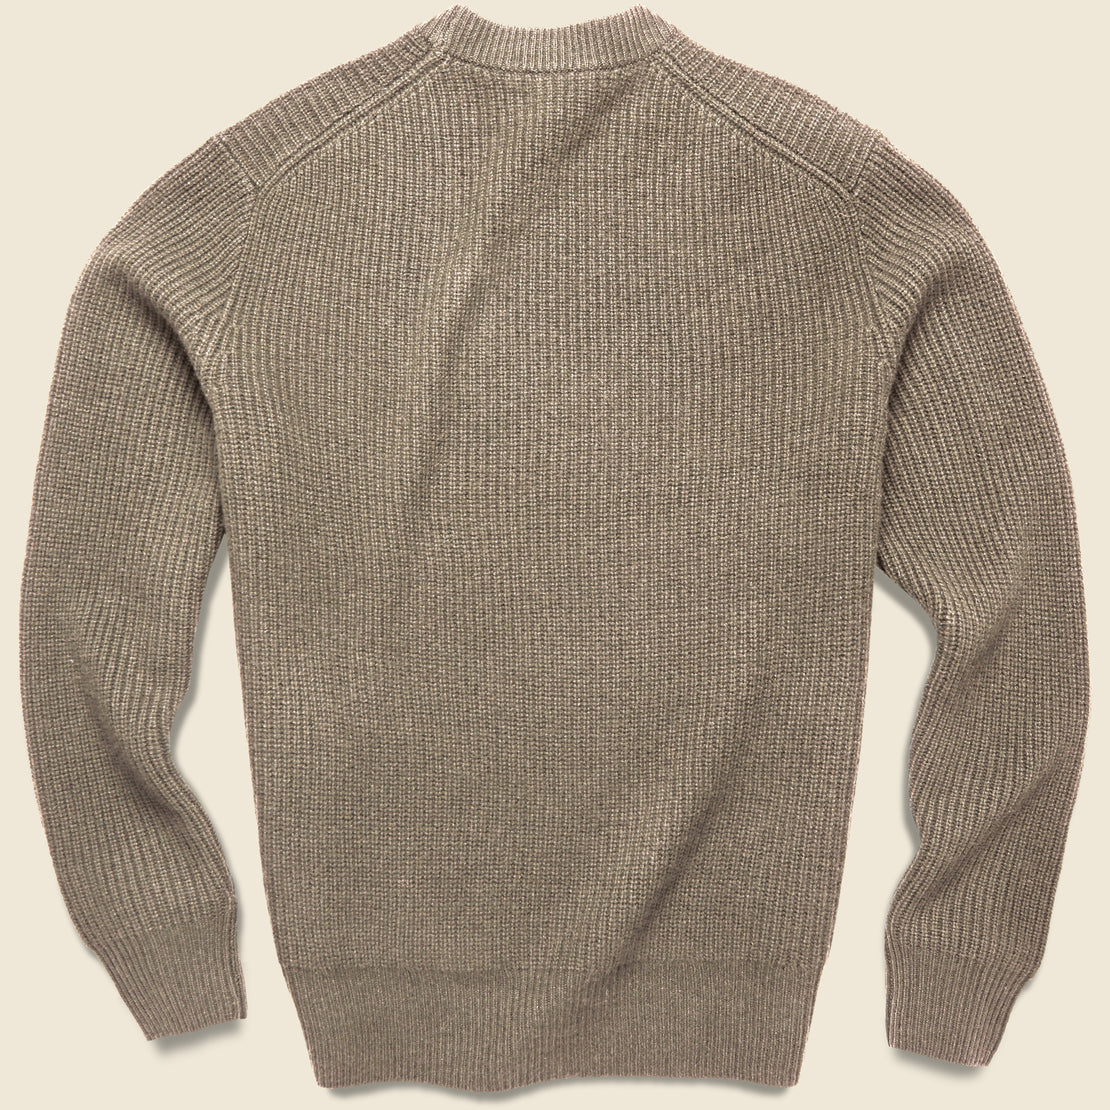 Cashmere Jordan Sweater - Taupe - Alex Mill - STAG Provisions - Tops - Sweater